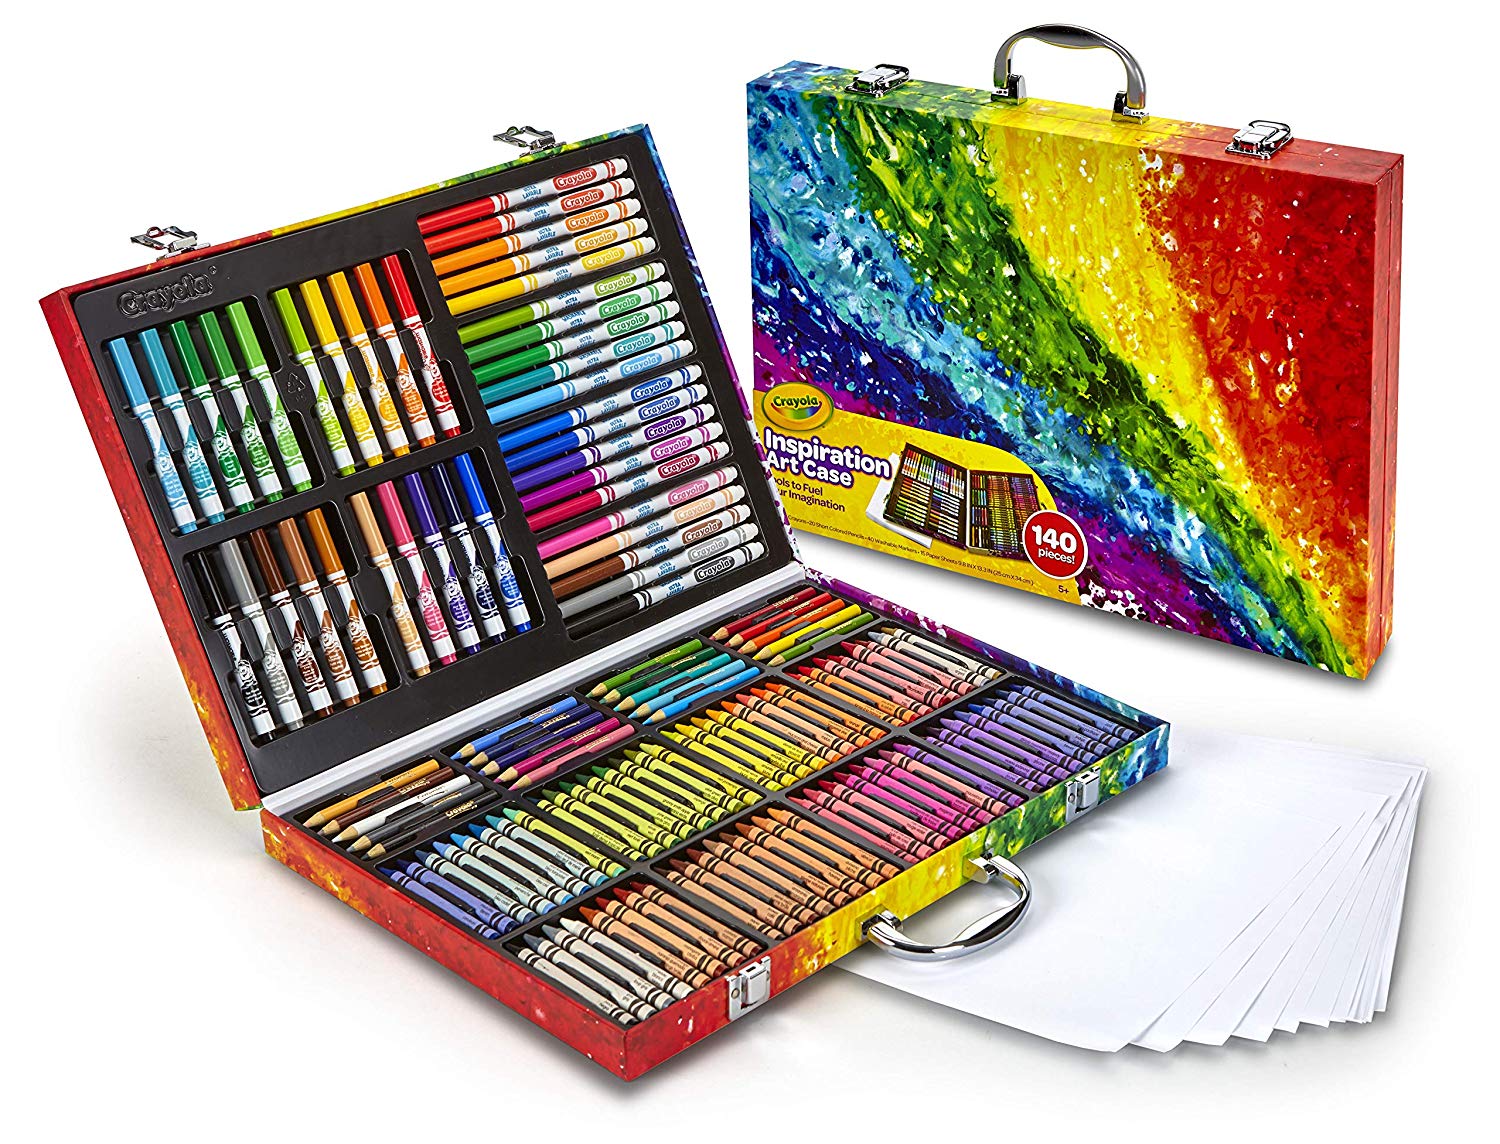 Crayola Inspiration Art Case Only $15.90! - Become a Coupon Queen